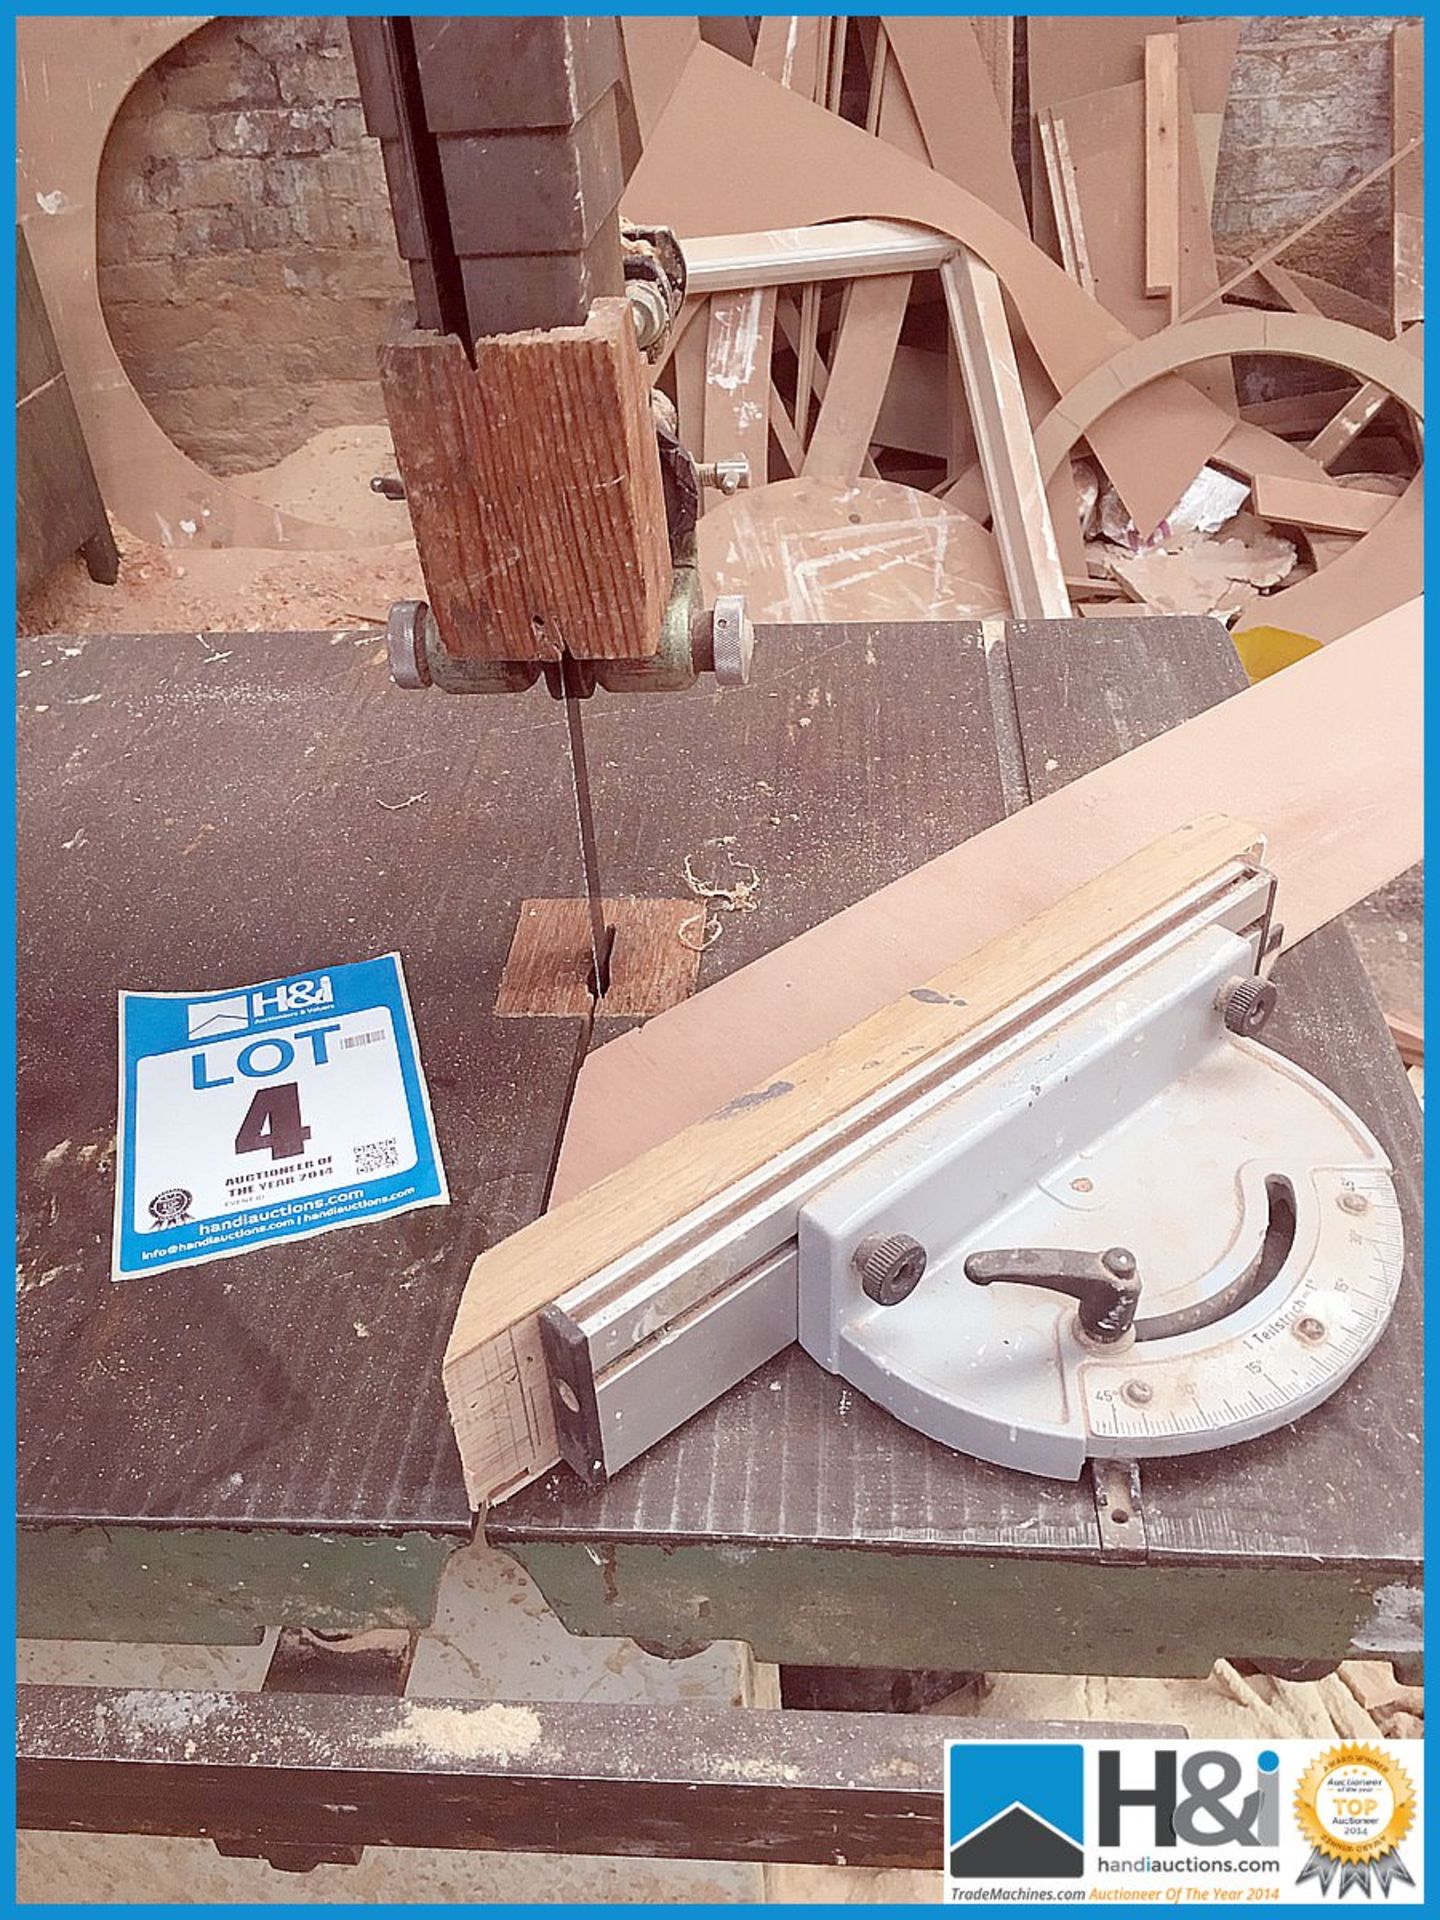 Centauro Bandsaw 3 phase 23| throat and appx 12" depth cut Appraisal: Used, good. Viewing - Image 8 of 8